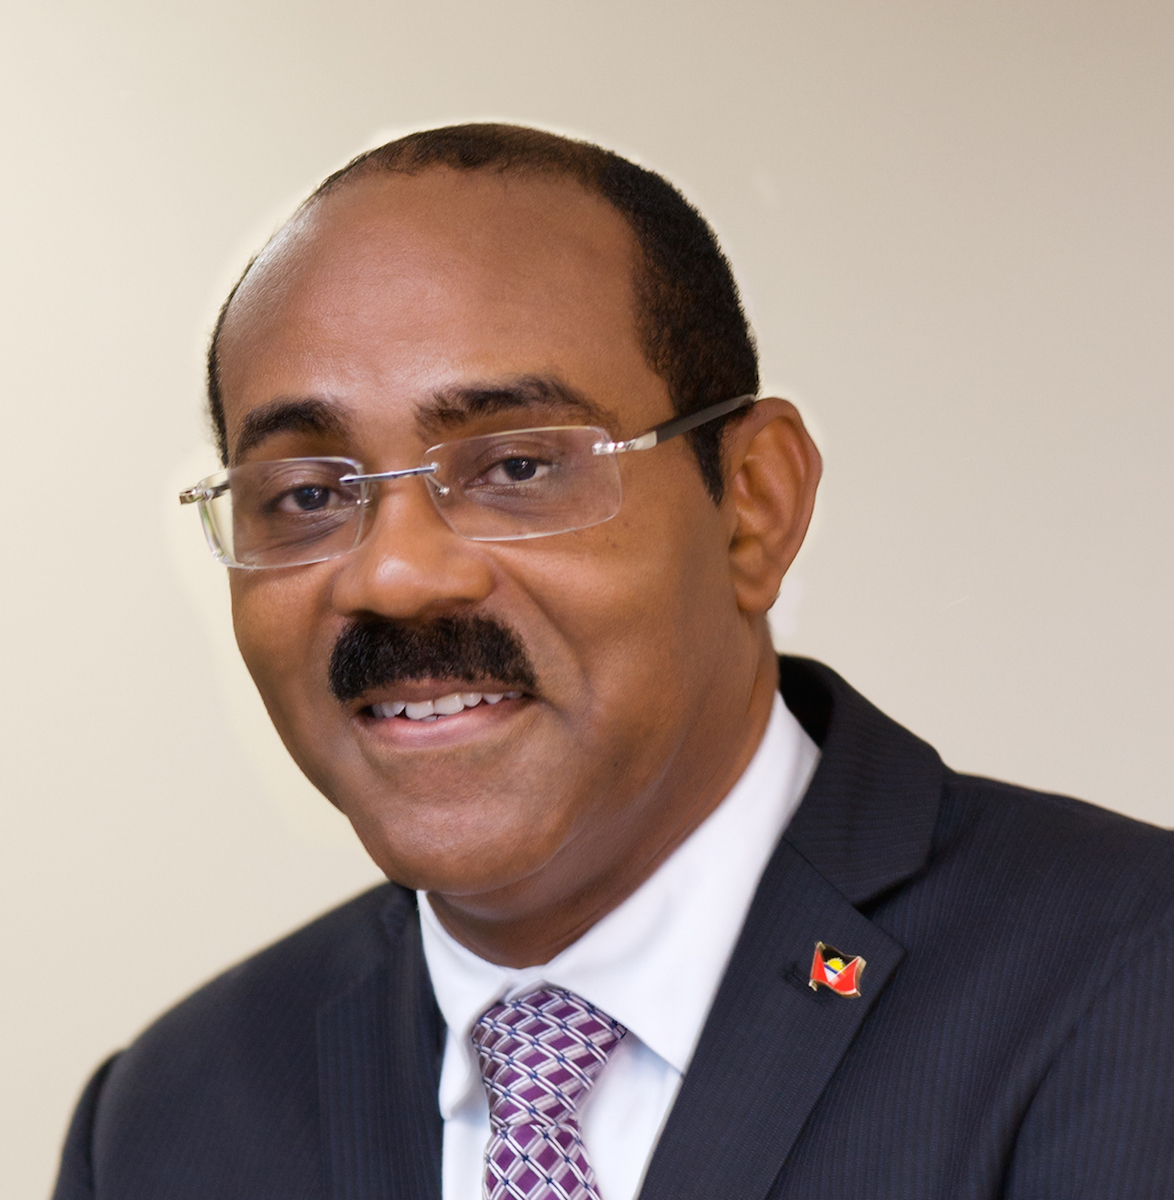 Statement by The Honourable Gaston Browne, Prime Minister of Antigua